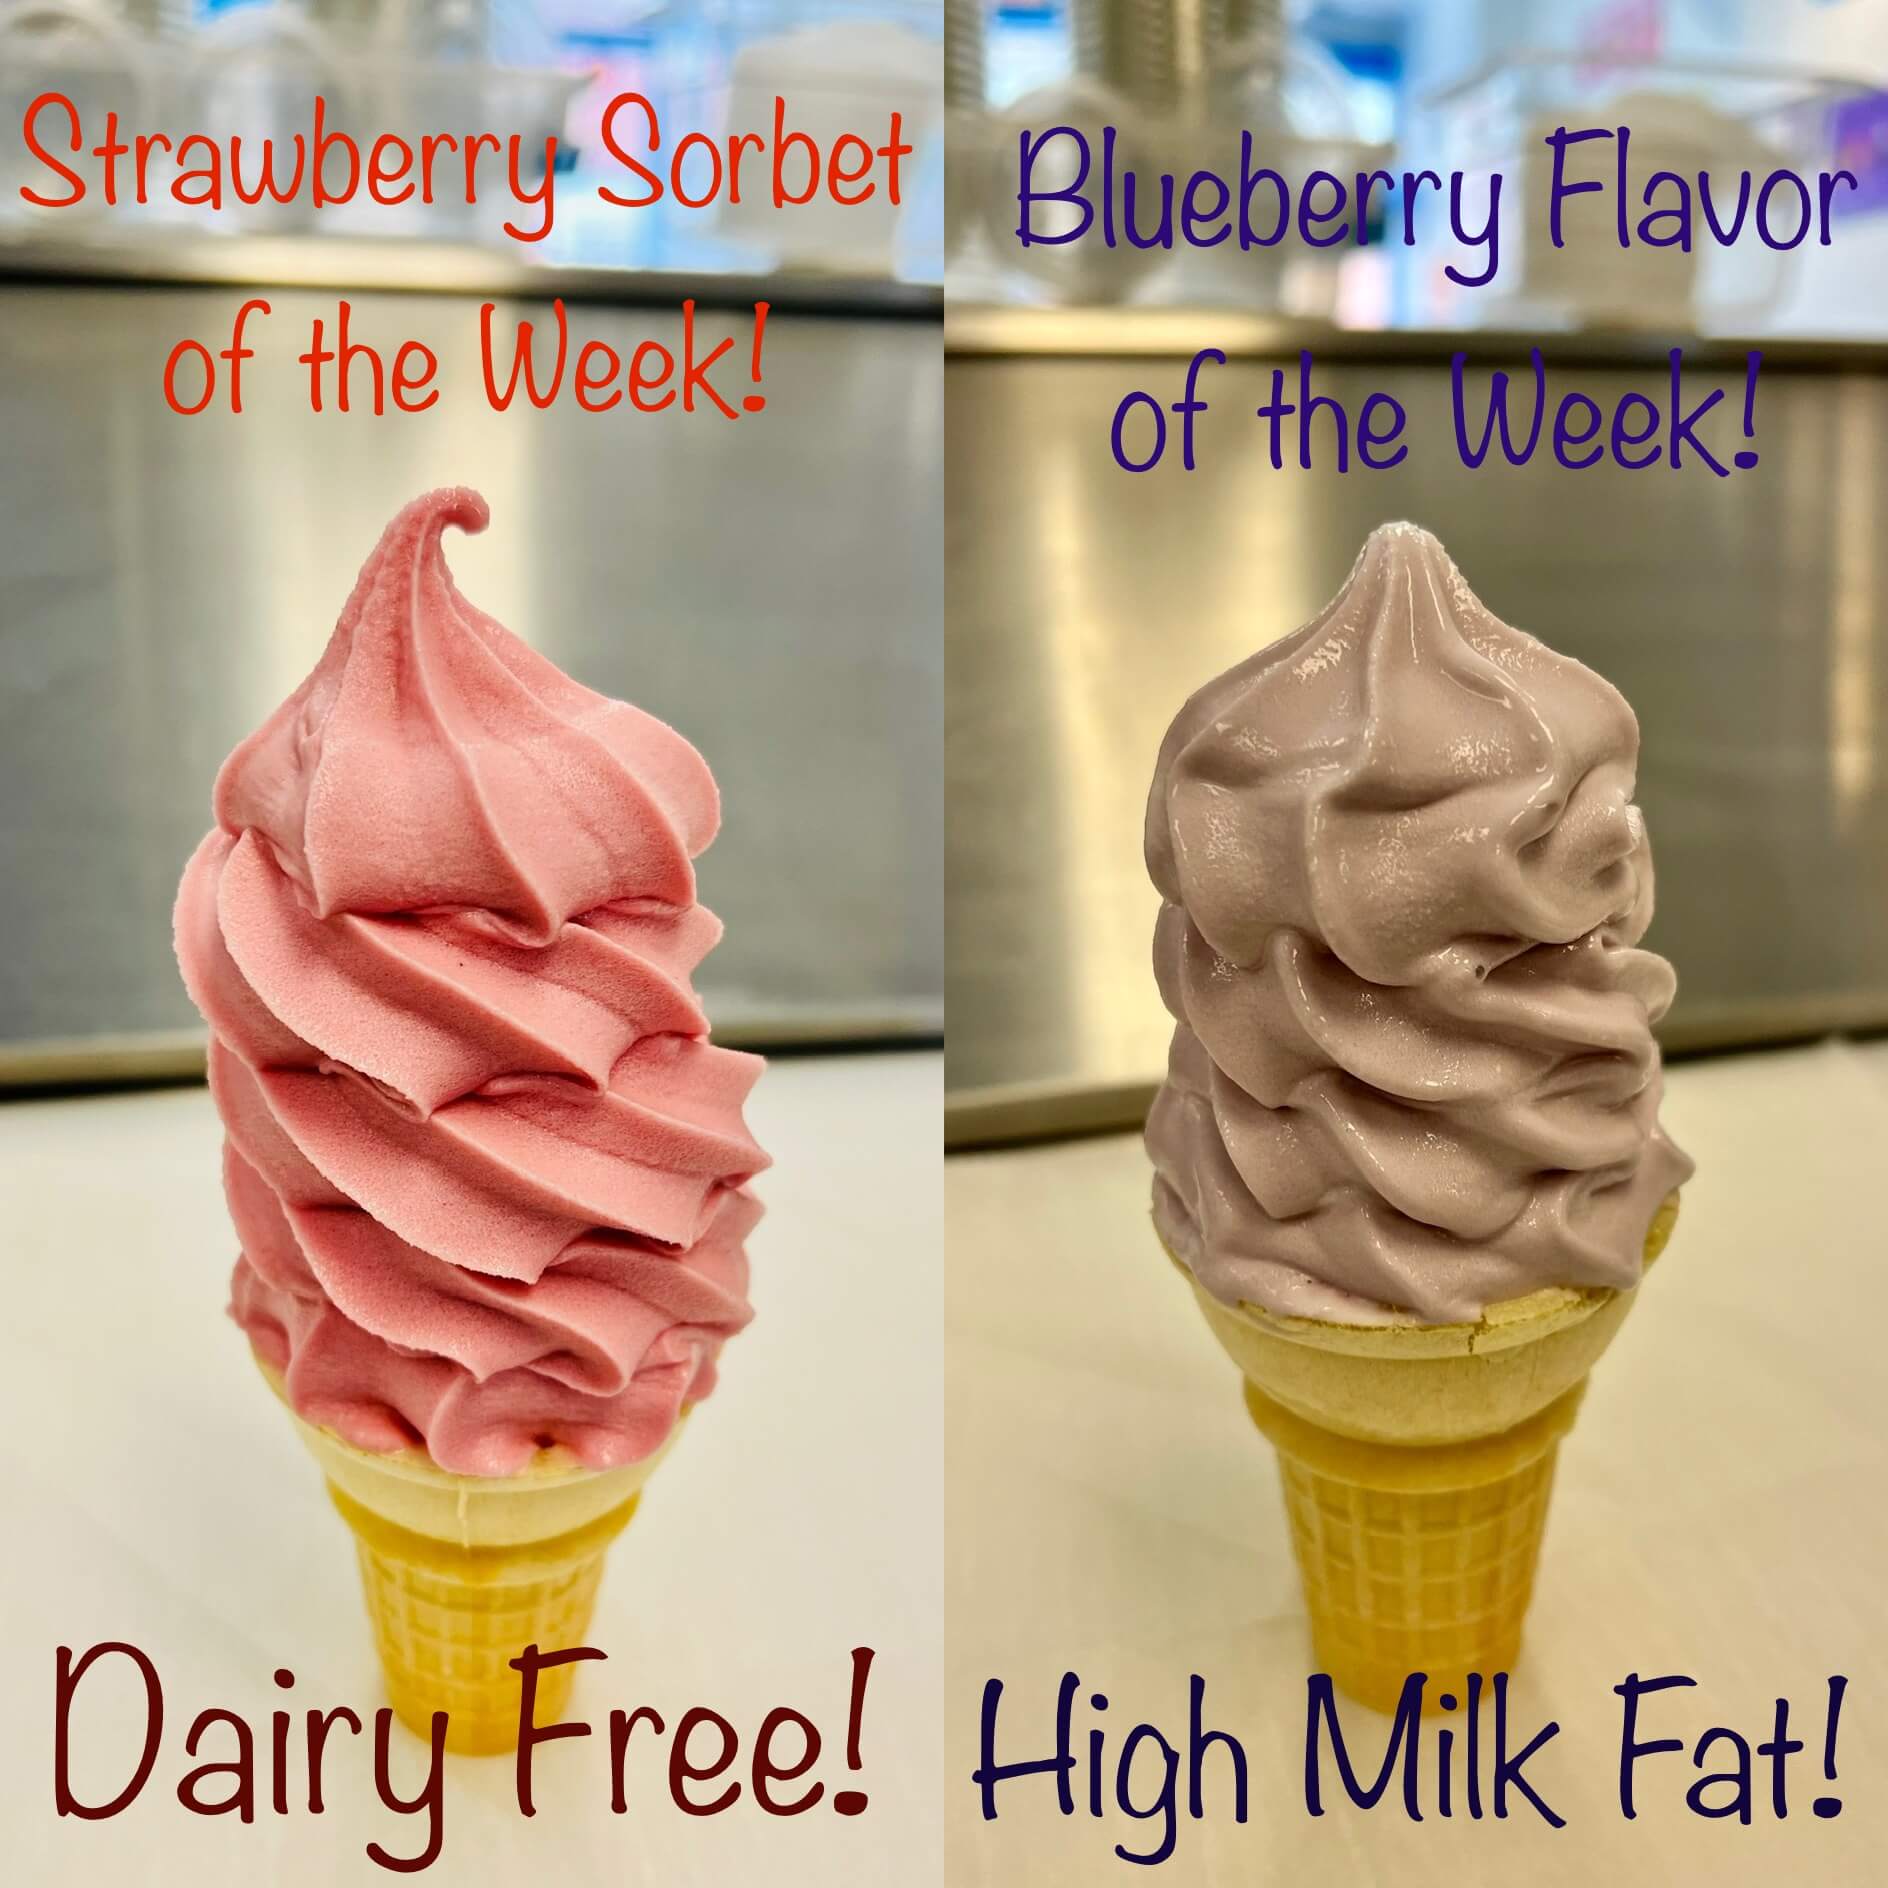 Strawberry sorbet of the week! And blueberry flavor of the week